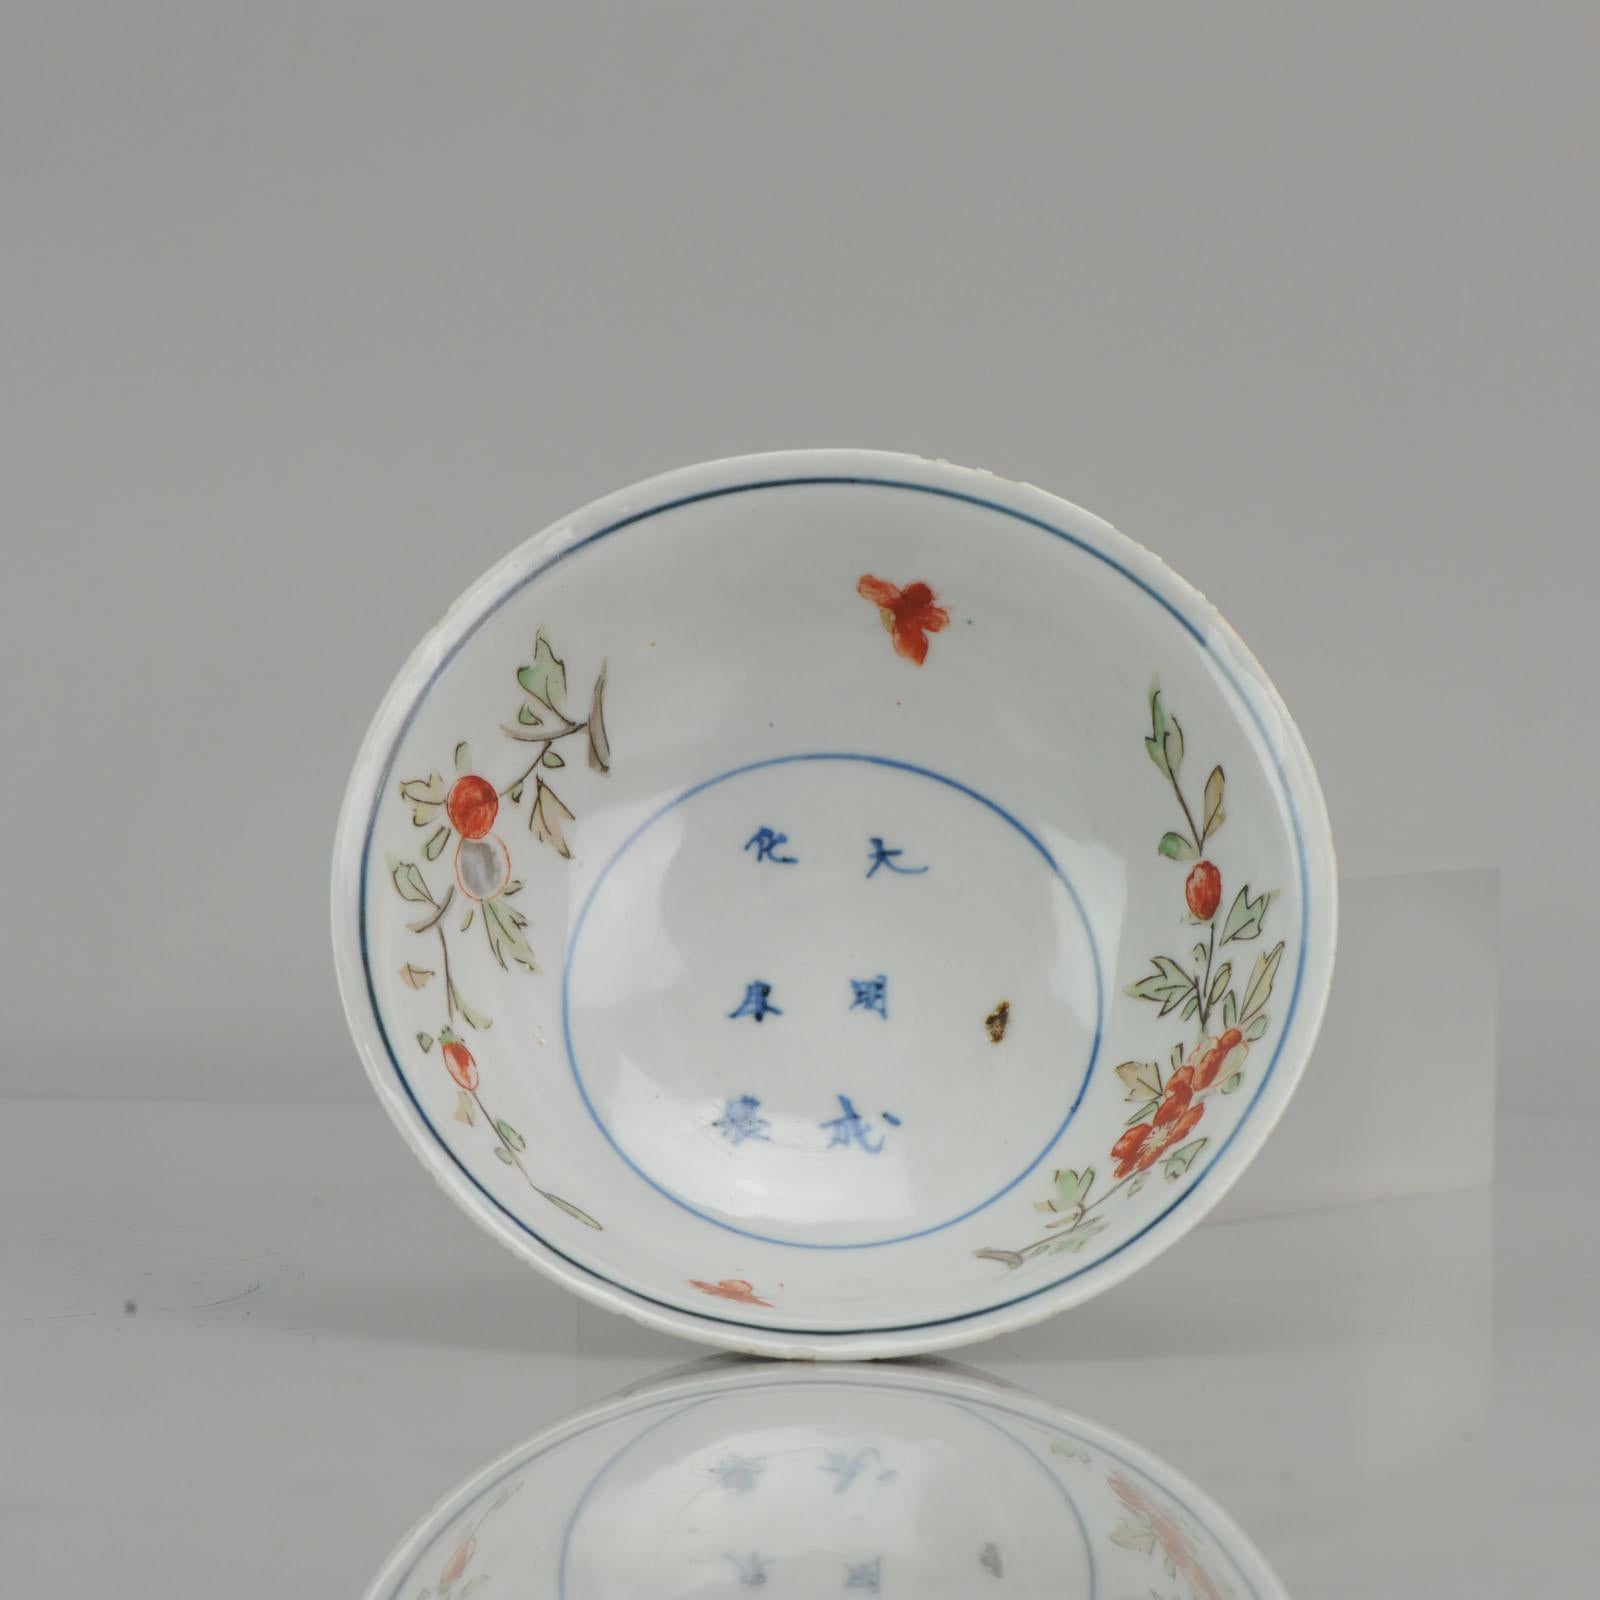 A very nicely decorated bowl. Late Ming. Underglaze blue and overglaze enamels. The mark is unusually inside the bowl, it is a Chenghua mark. The bowl is later period.

A scene of two different figures in what seems like a garden. 1 person is